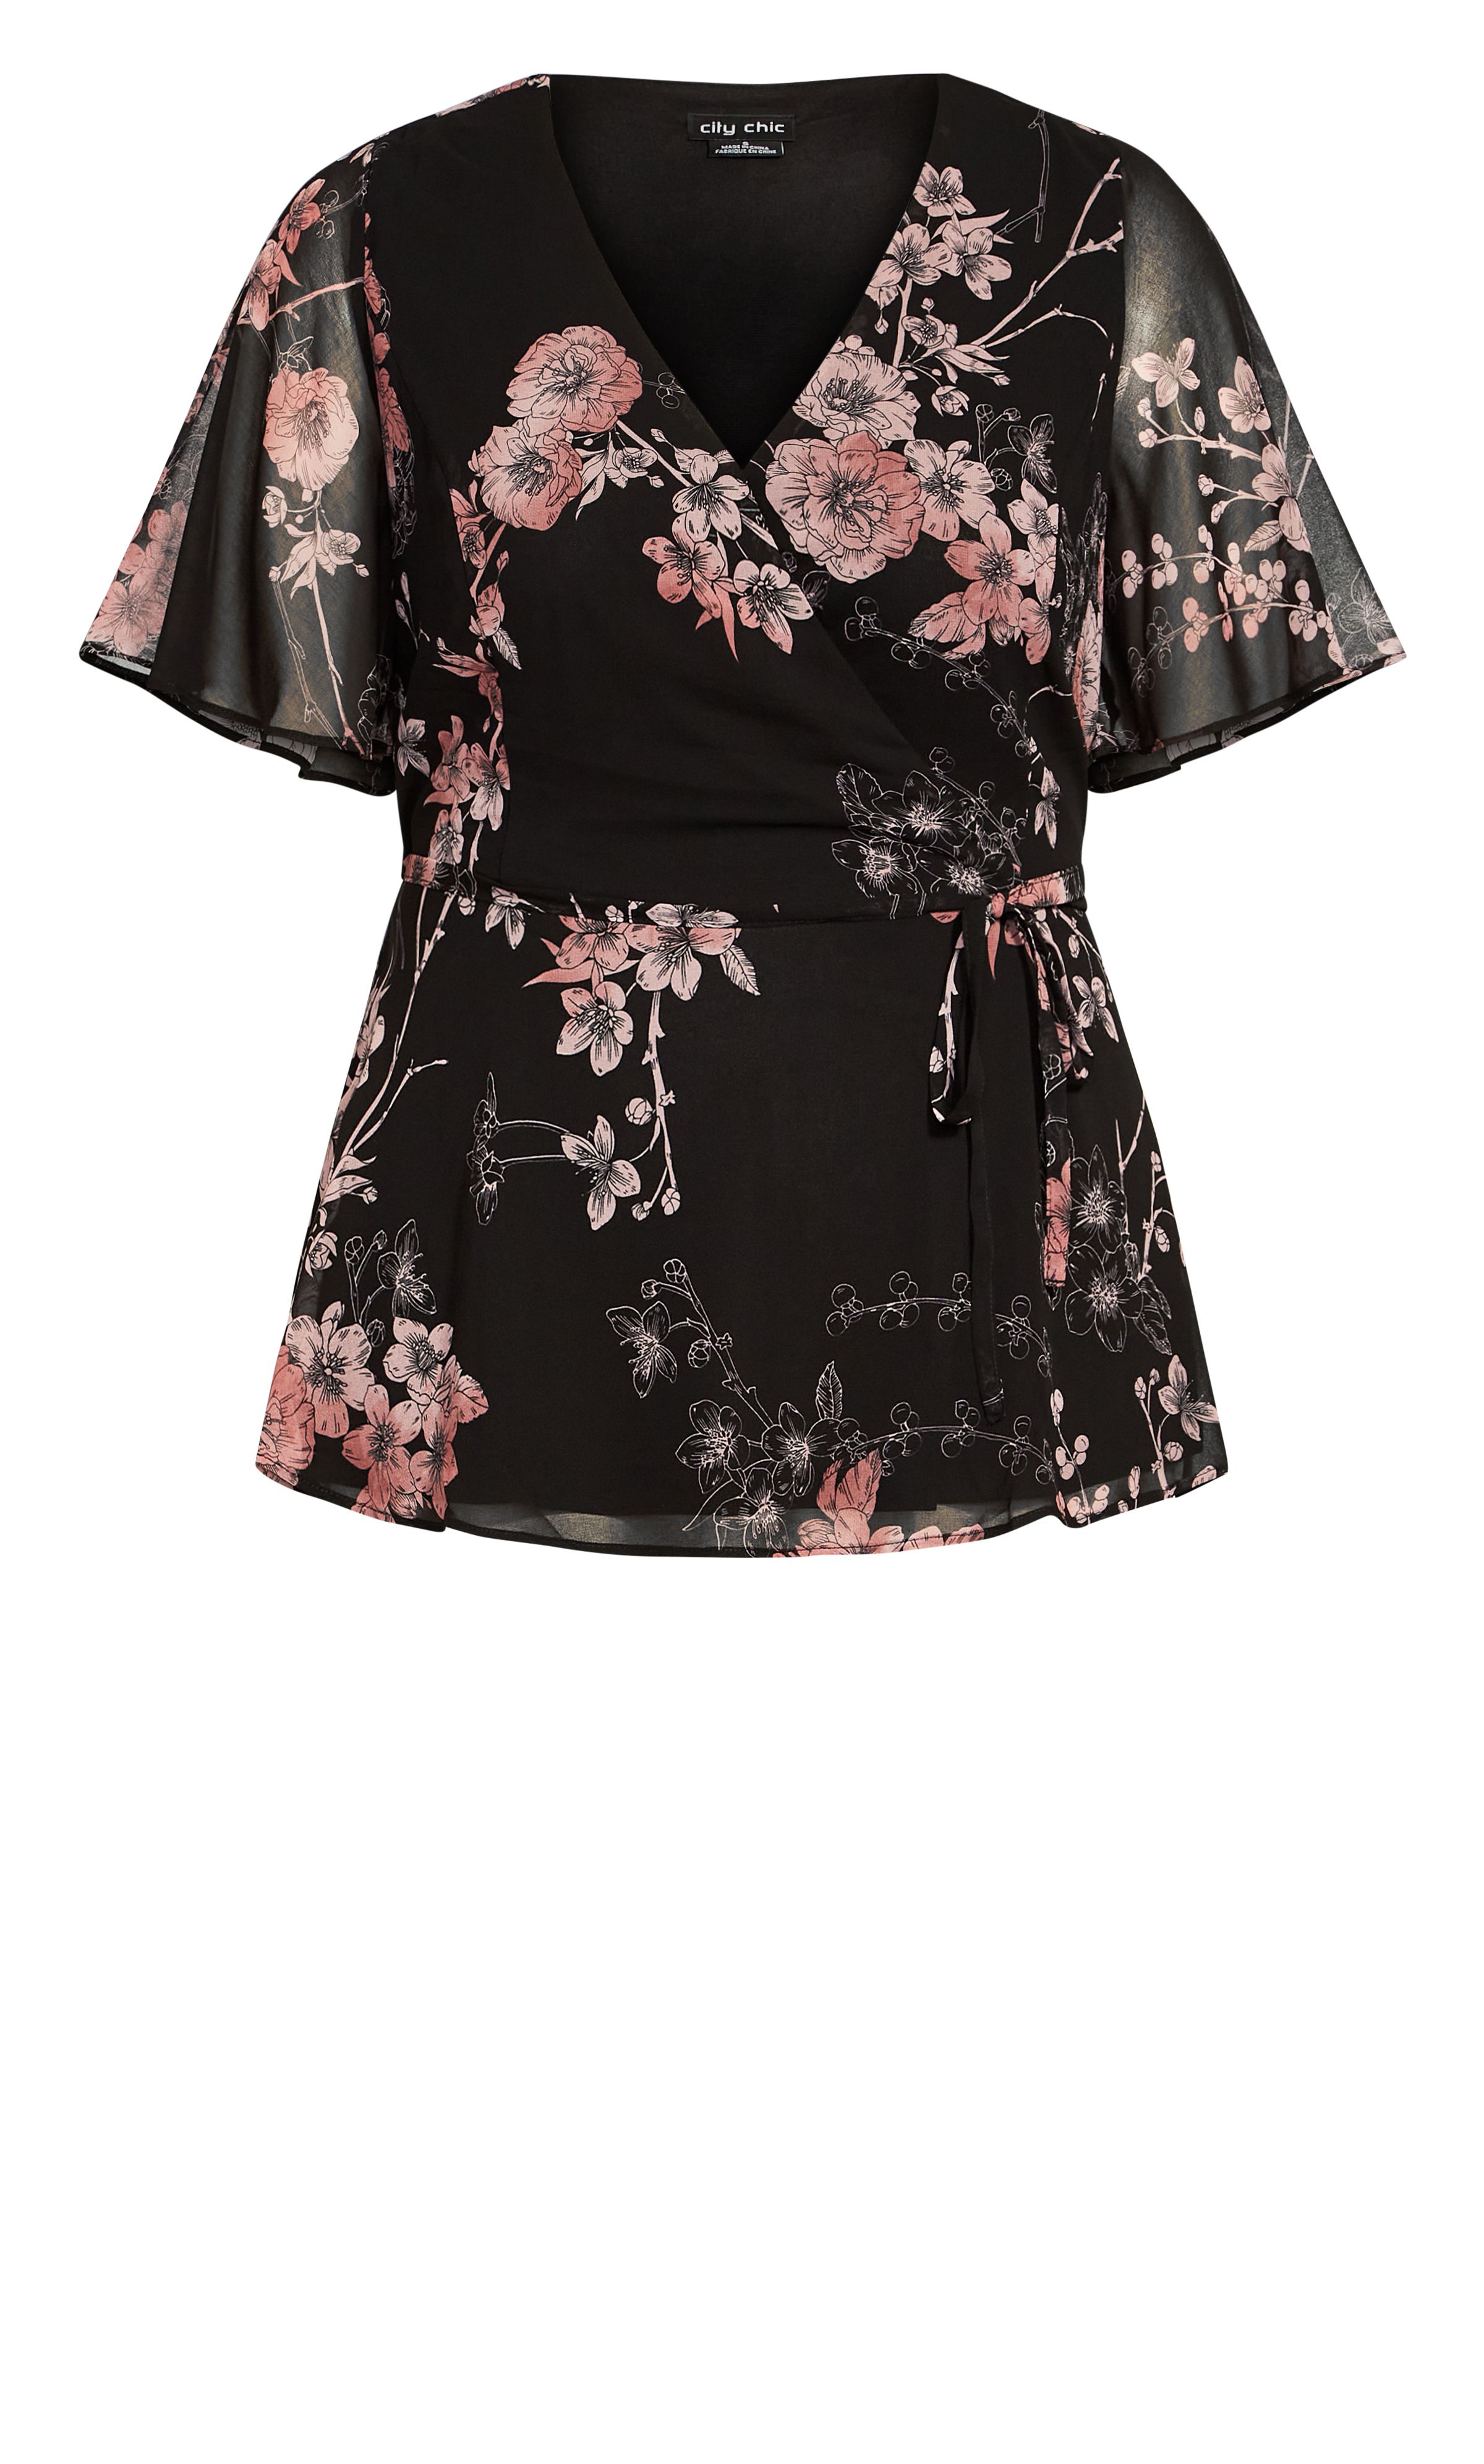 Effortlessly combine classic romanticism with utter femininity in the Blossom Love Top. Featuring a deep V-neckline, short sleeves, a fabric tie to the waist and a glamorous all-over floral print, this blouse is an adaptable and versatile wardrobe essential. Key Features Include: - Faux wrap ruffled V neckline - Elbow length frilled sleeves - Elasticated back waistline with adjustable tie - Peplum silhouette - Relaxed hemline - Lightweight unlined fabrication Style this top with a pair of black skinny jeans and ankle boots!